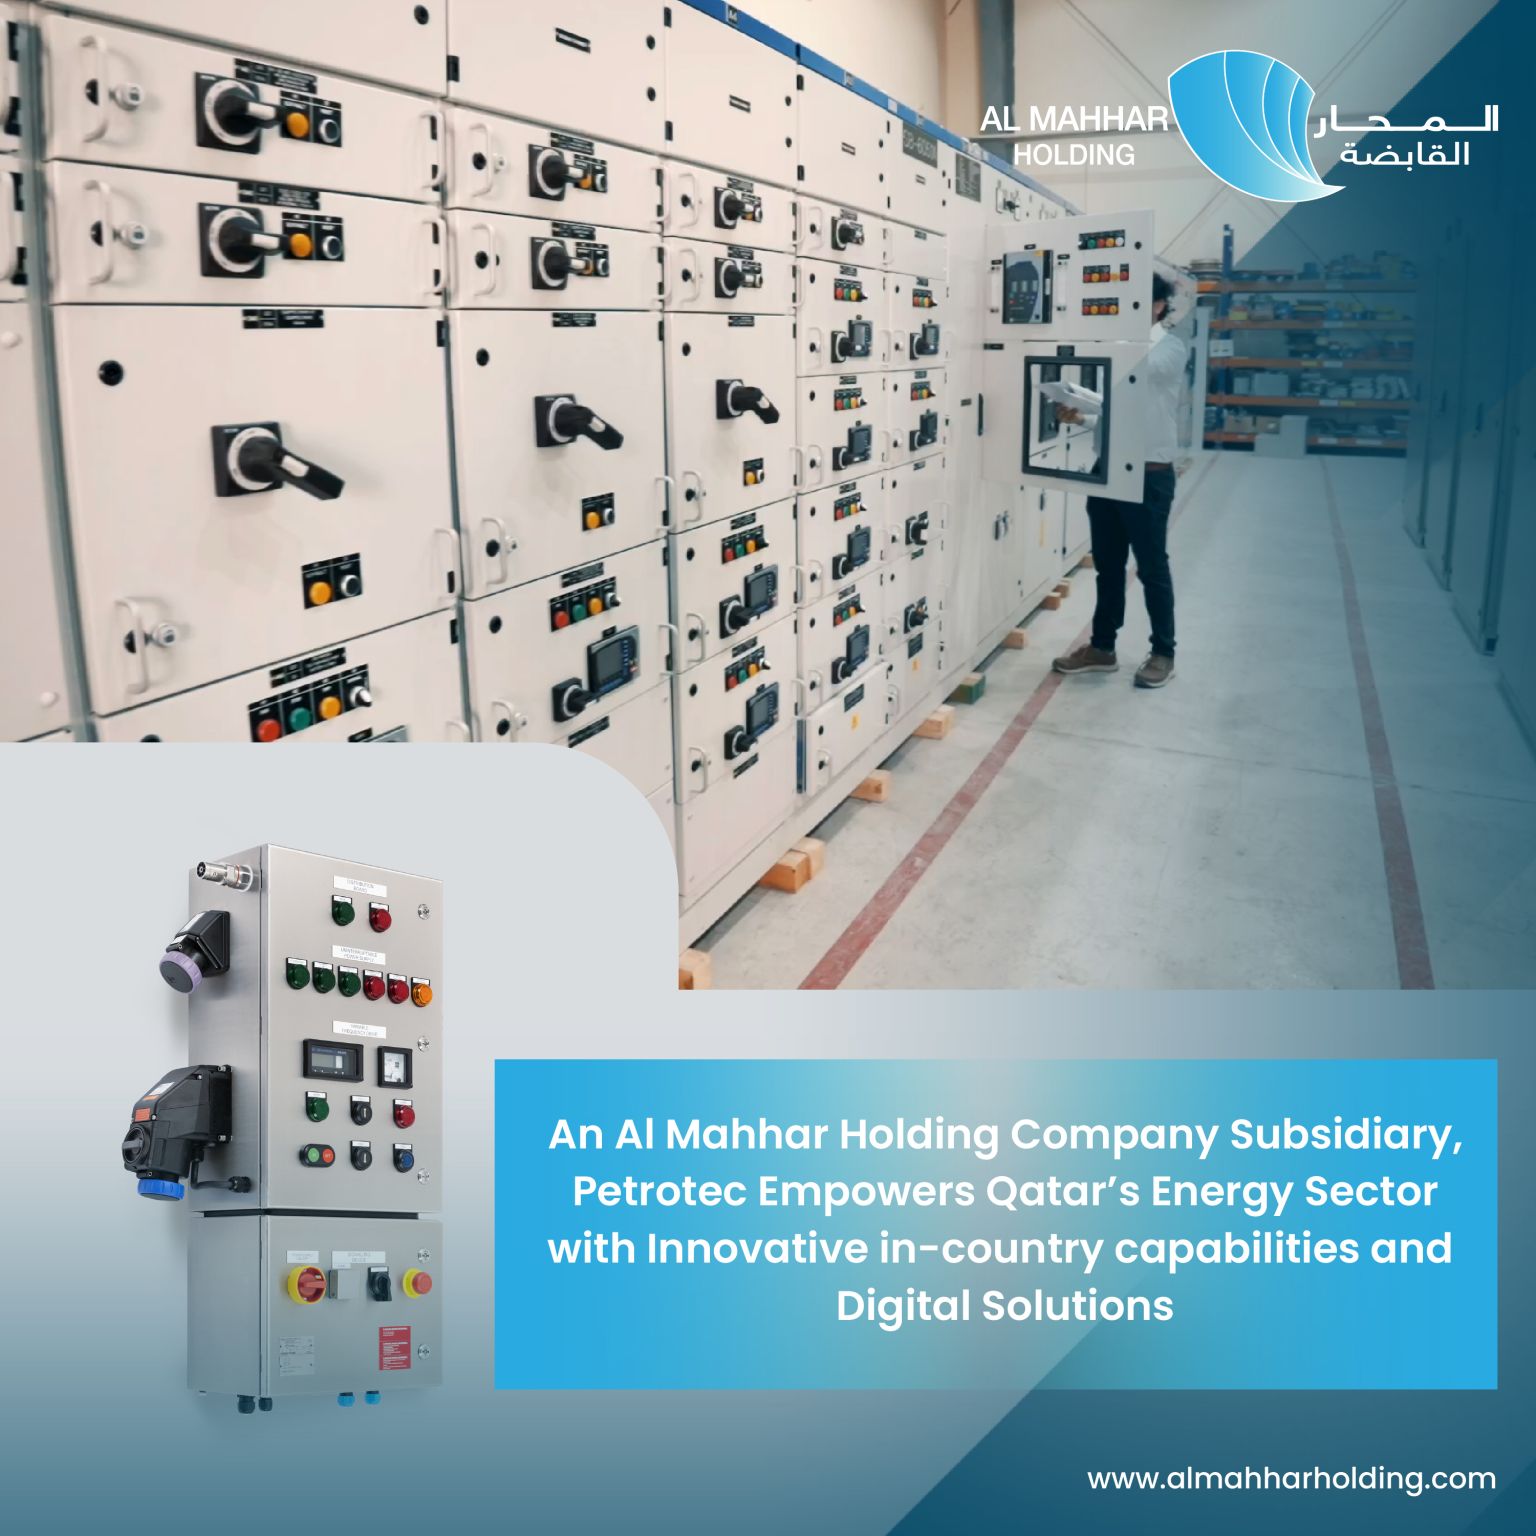 From PLCs to Cloud - Qatar's Energy Infrastructure